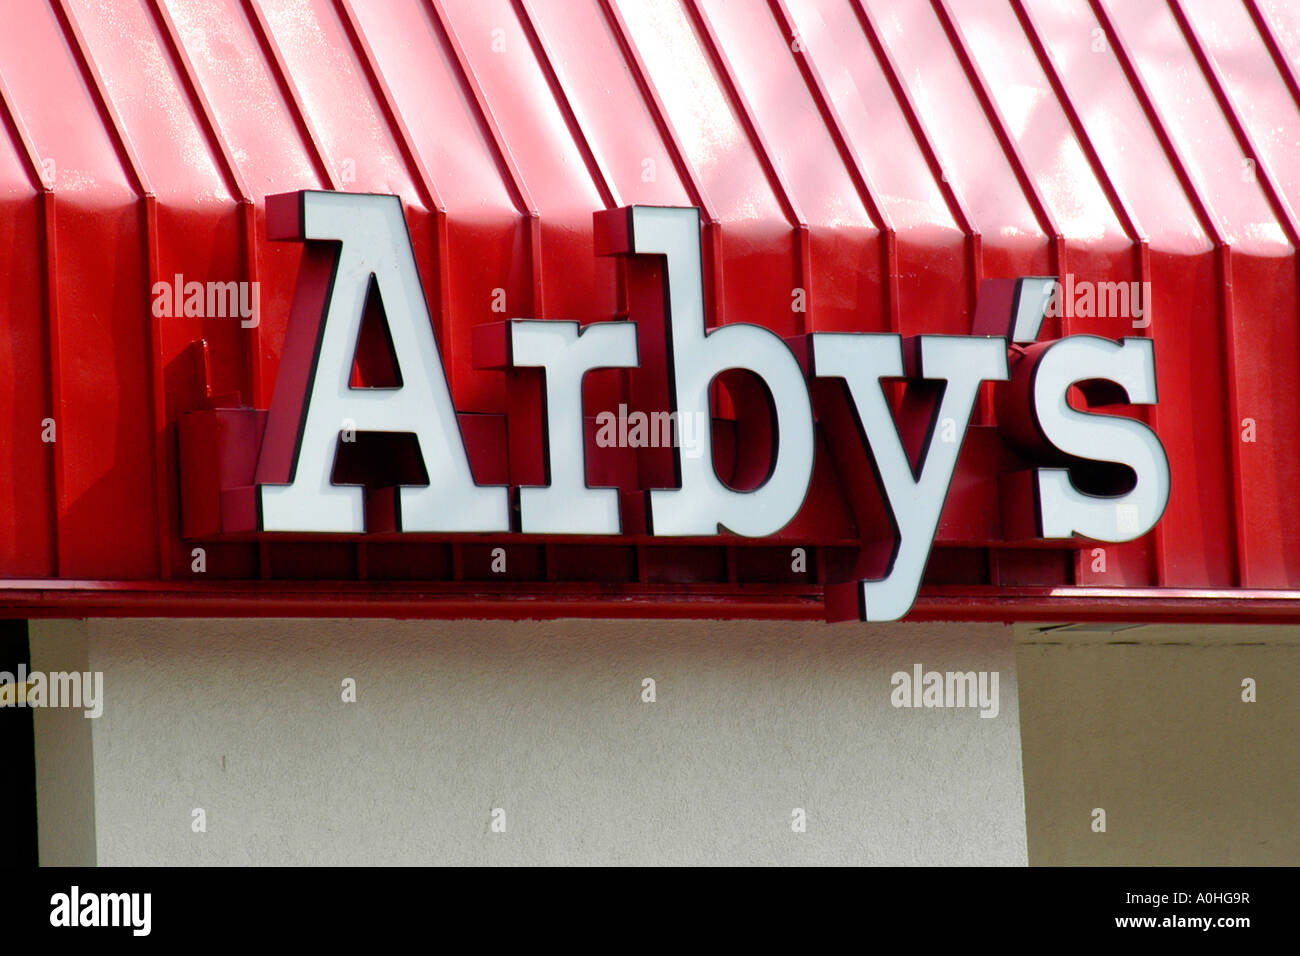 Arby s Fast Food Restaurant sign Stock Photo